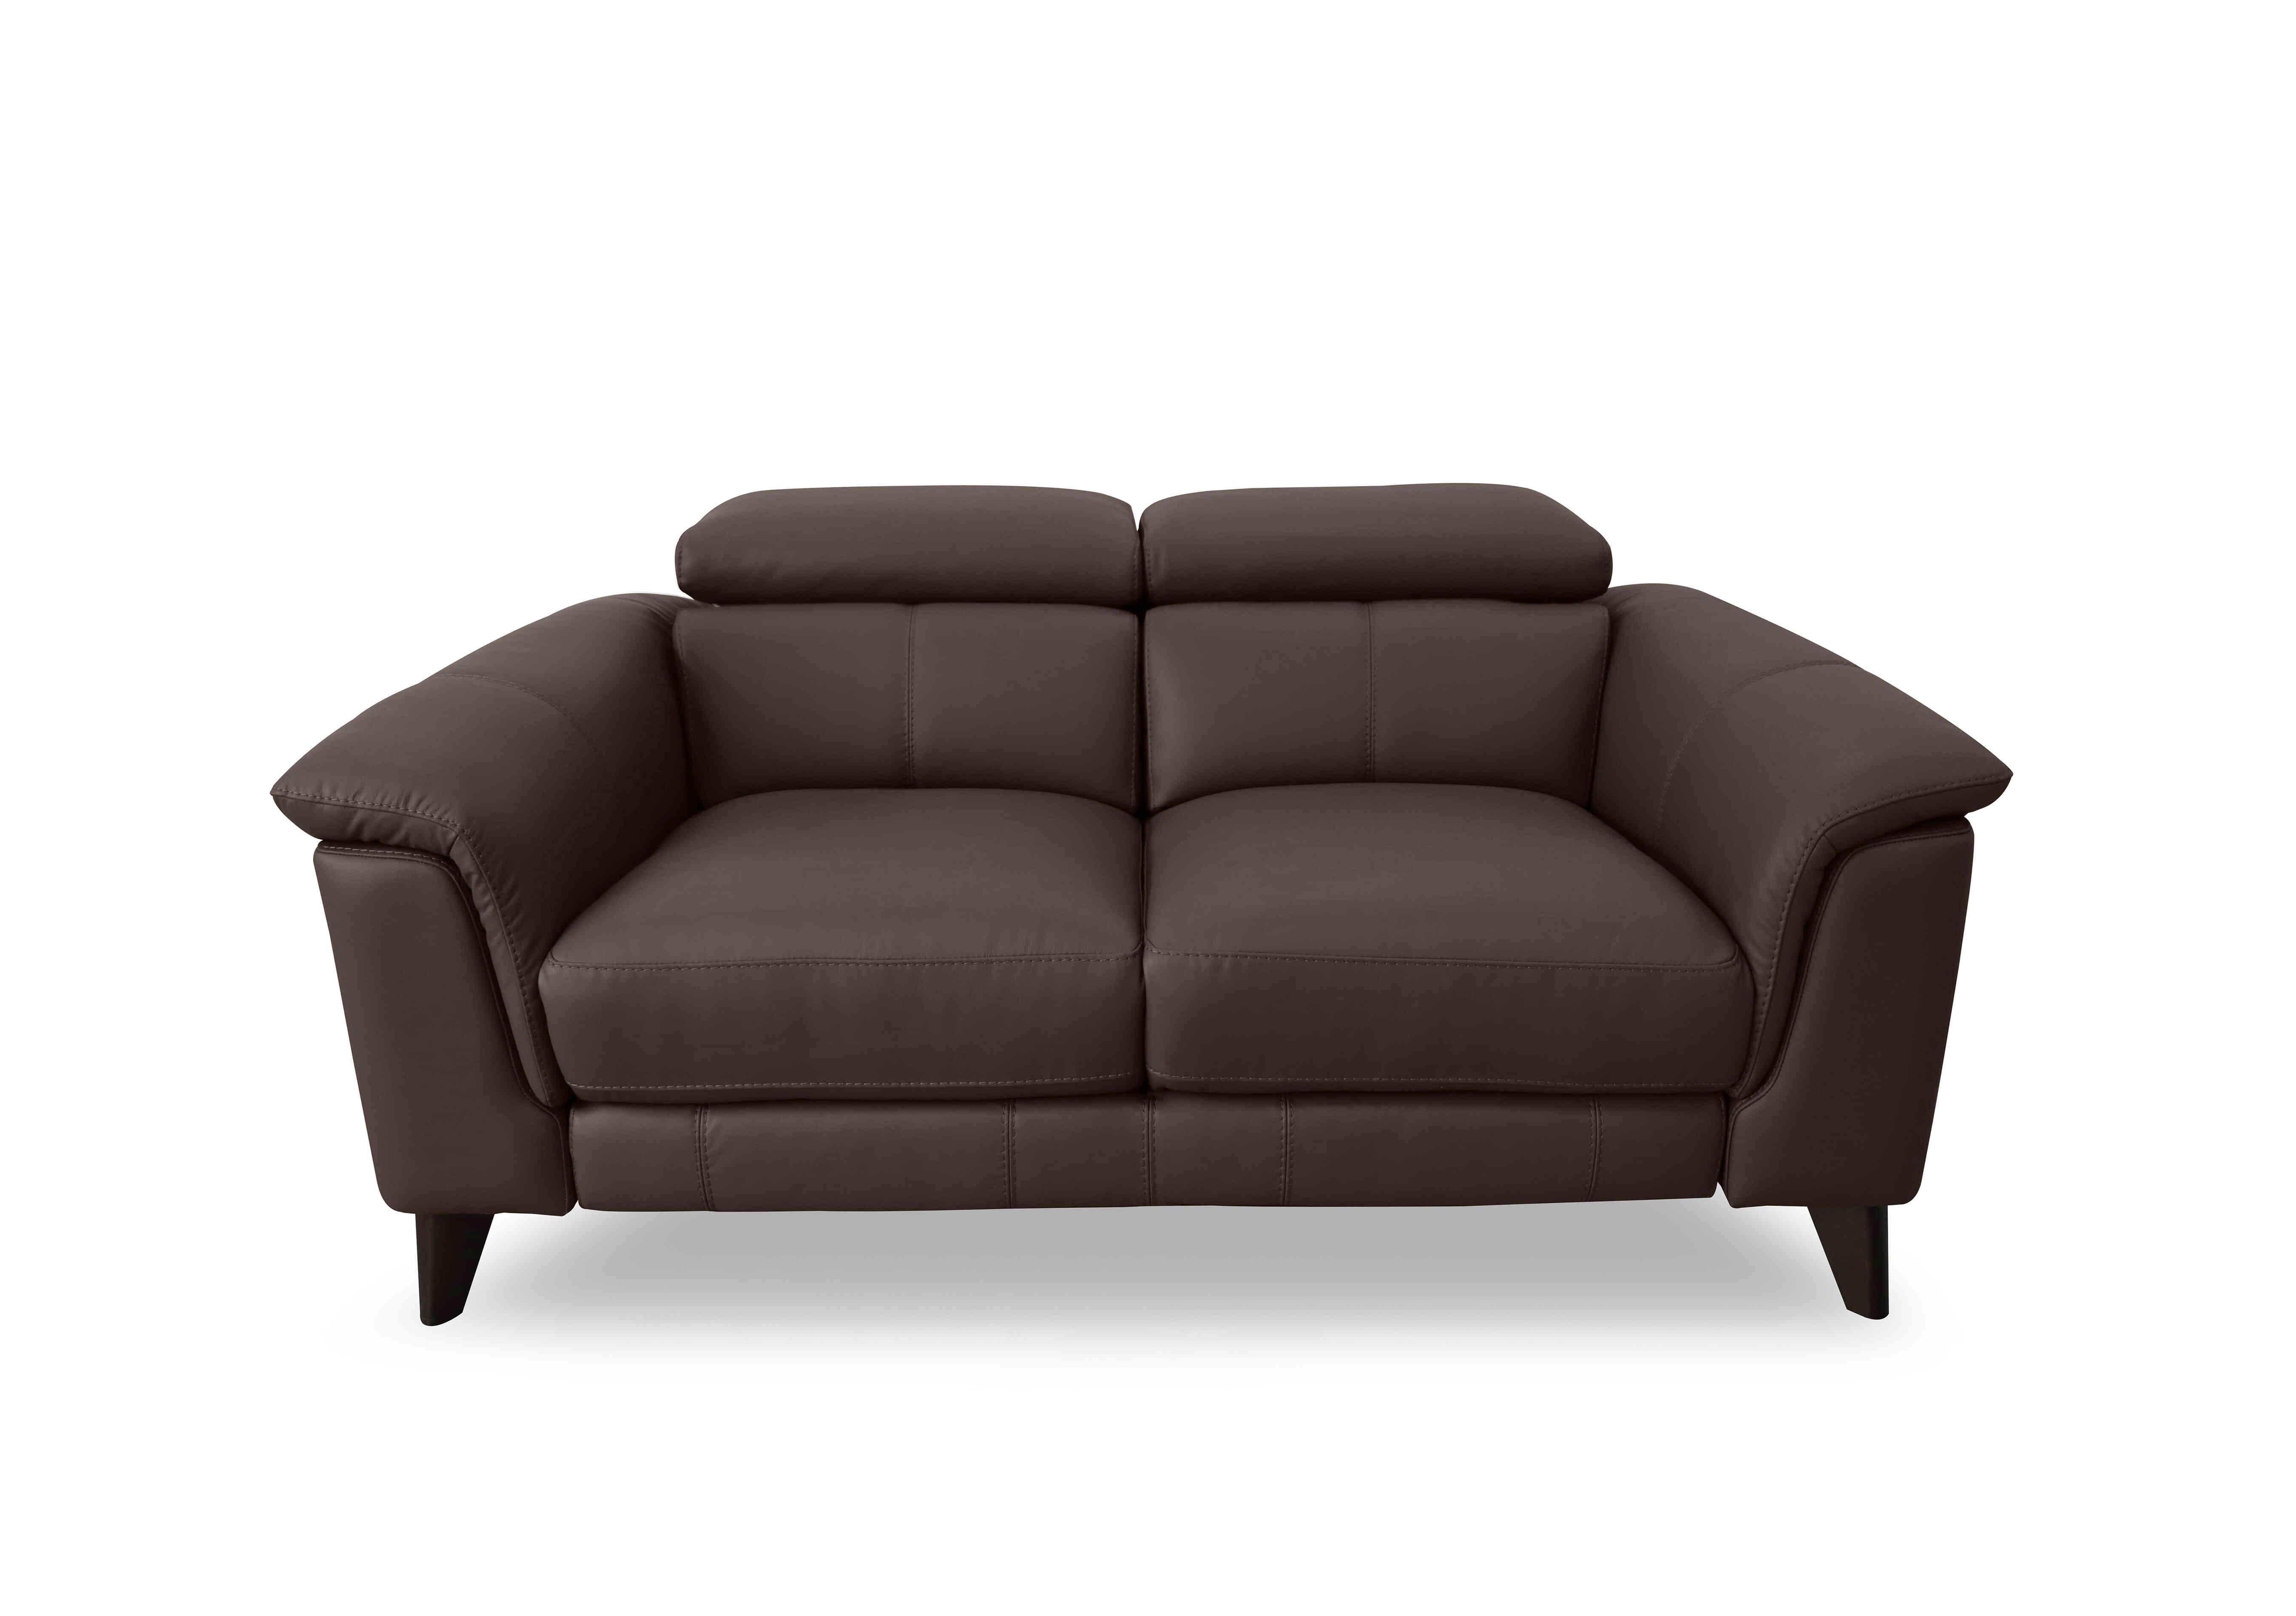 Wade 2 Seater Leather Sofa in Nw-512e Cacao on Furniture Village